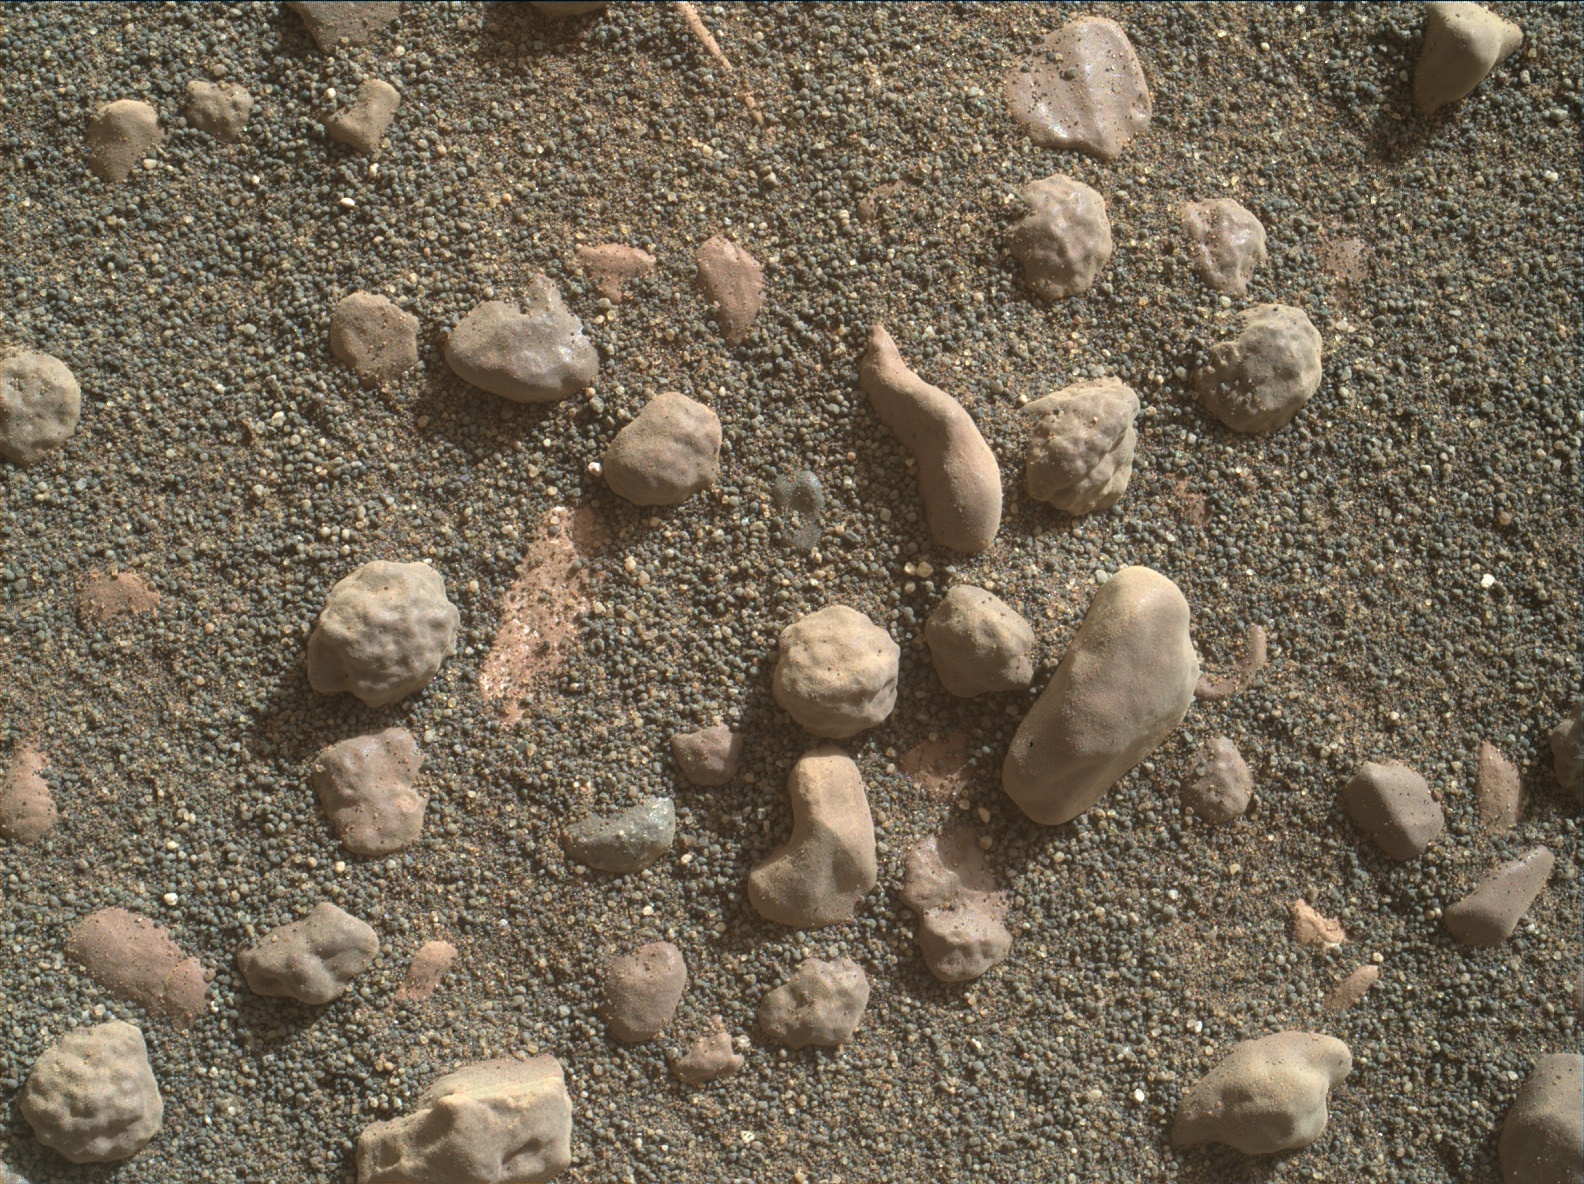 Nasa's Mars rover Curiosity acquired this image using its Mars Hand Lens Imager (MAHLI) on Sol 1807